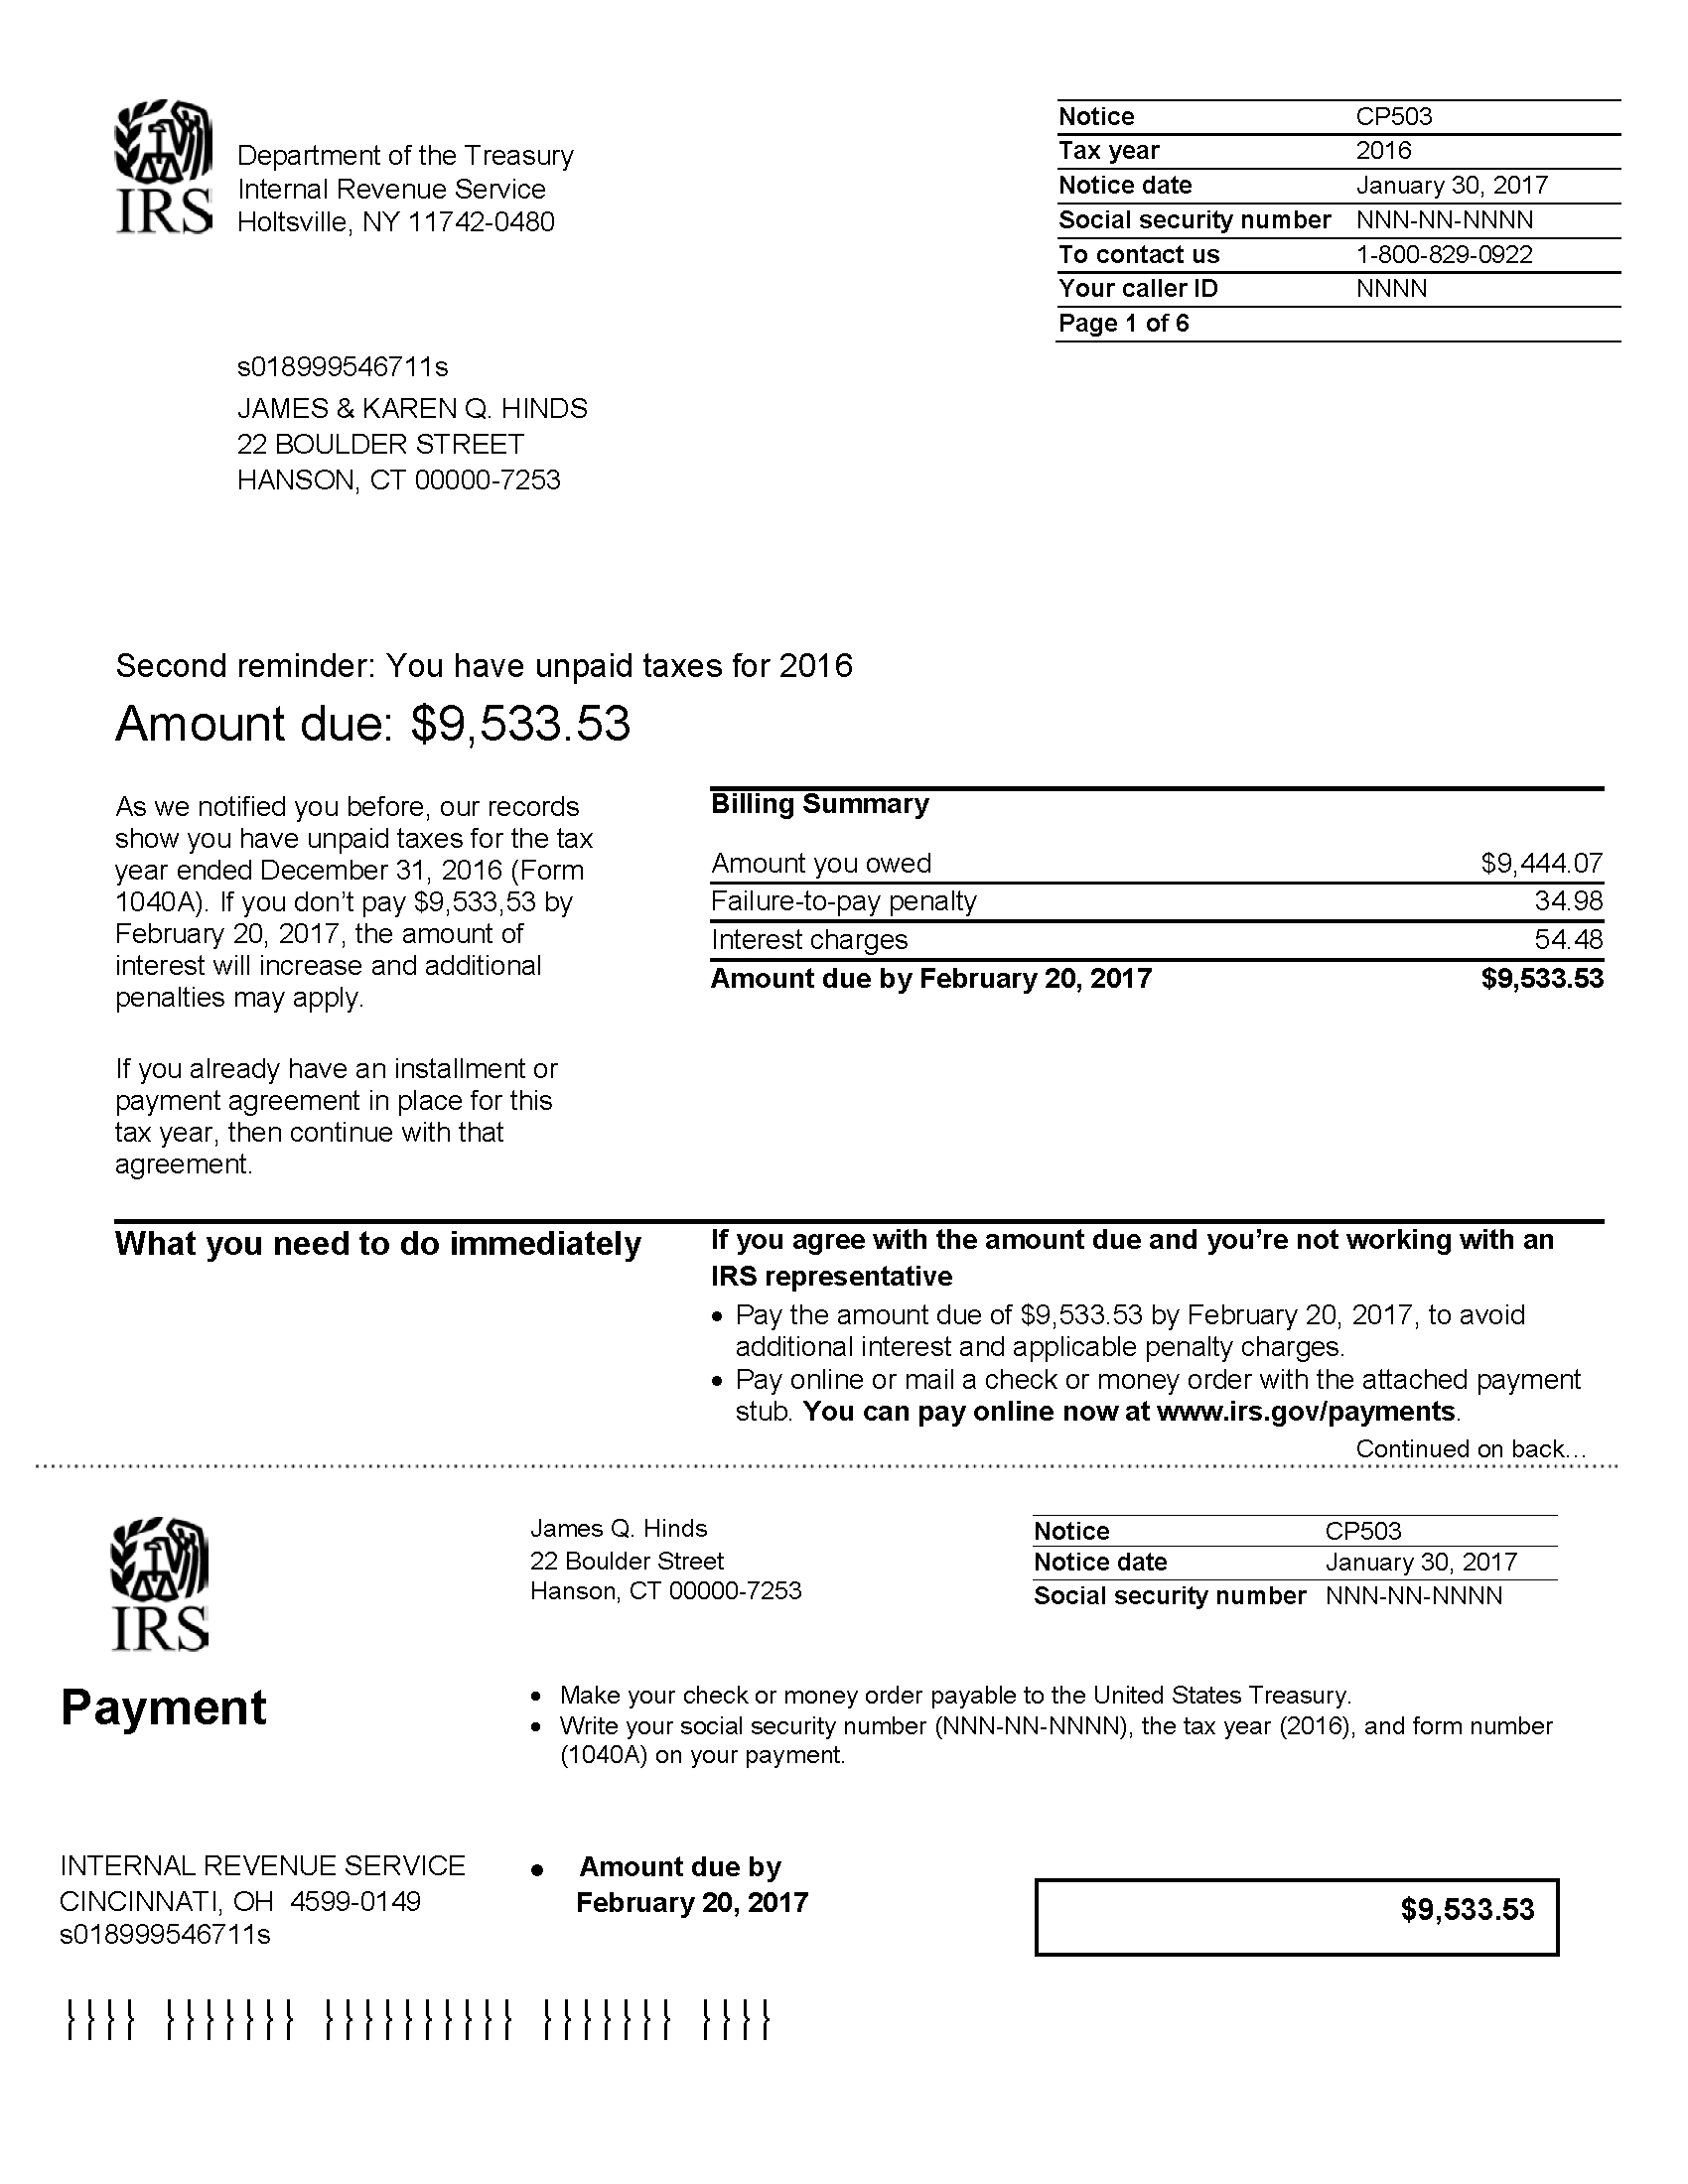 Irs Installment Agreement Online Irs Notice Cp503 Second Reminder For Unpaid Taxes Hr Block